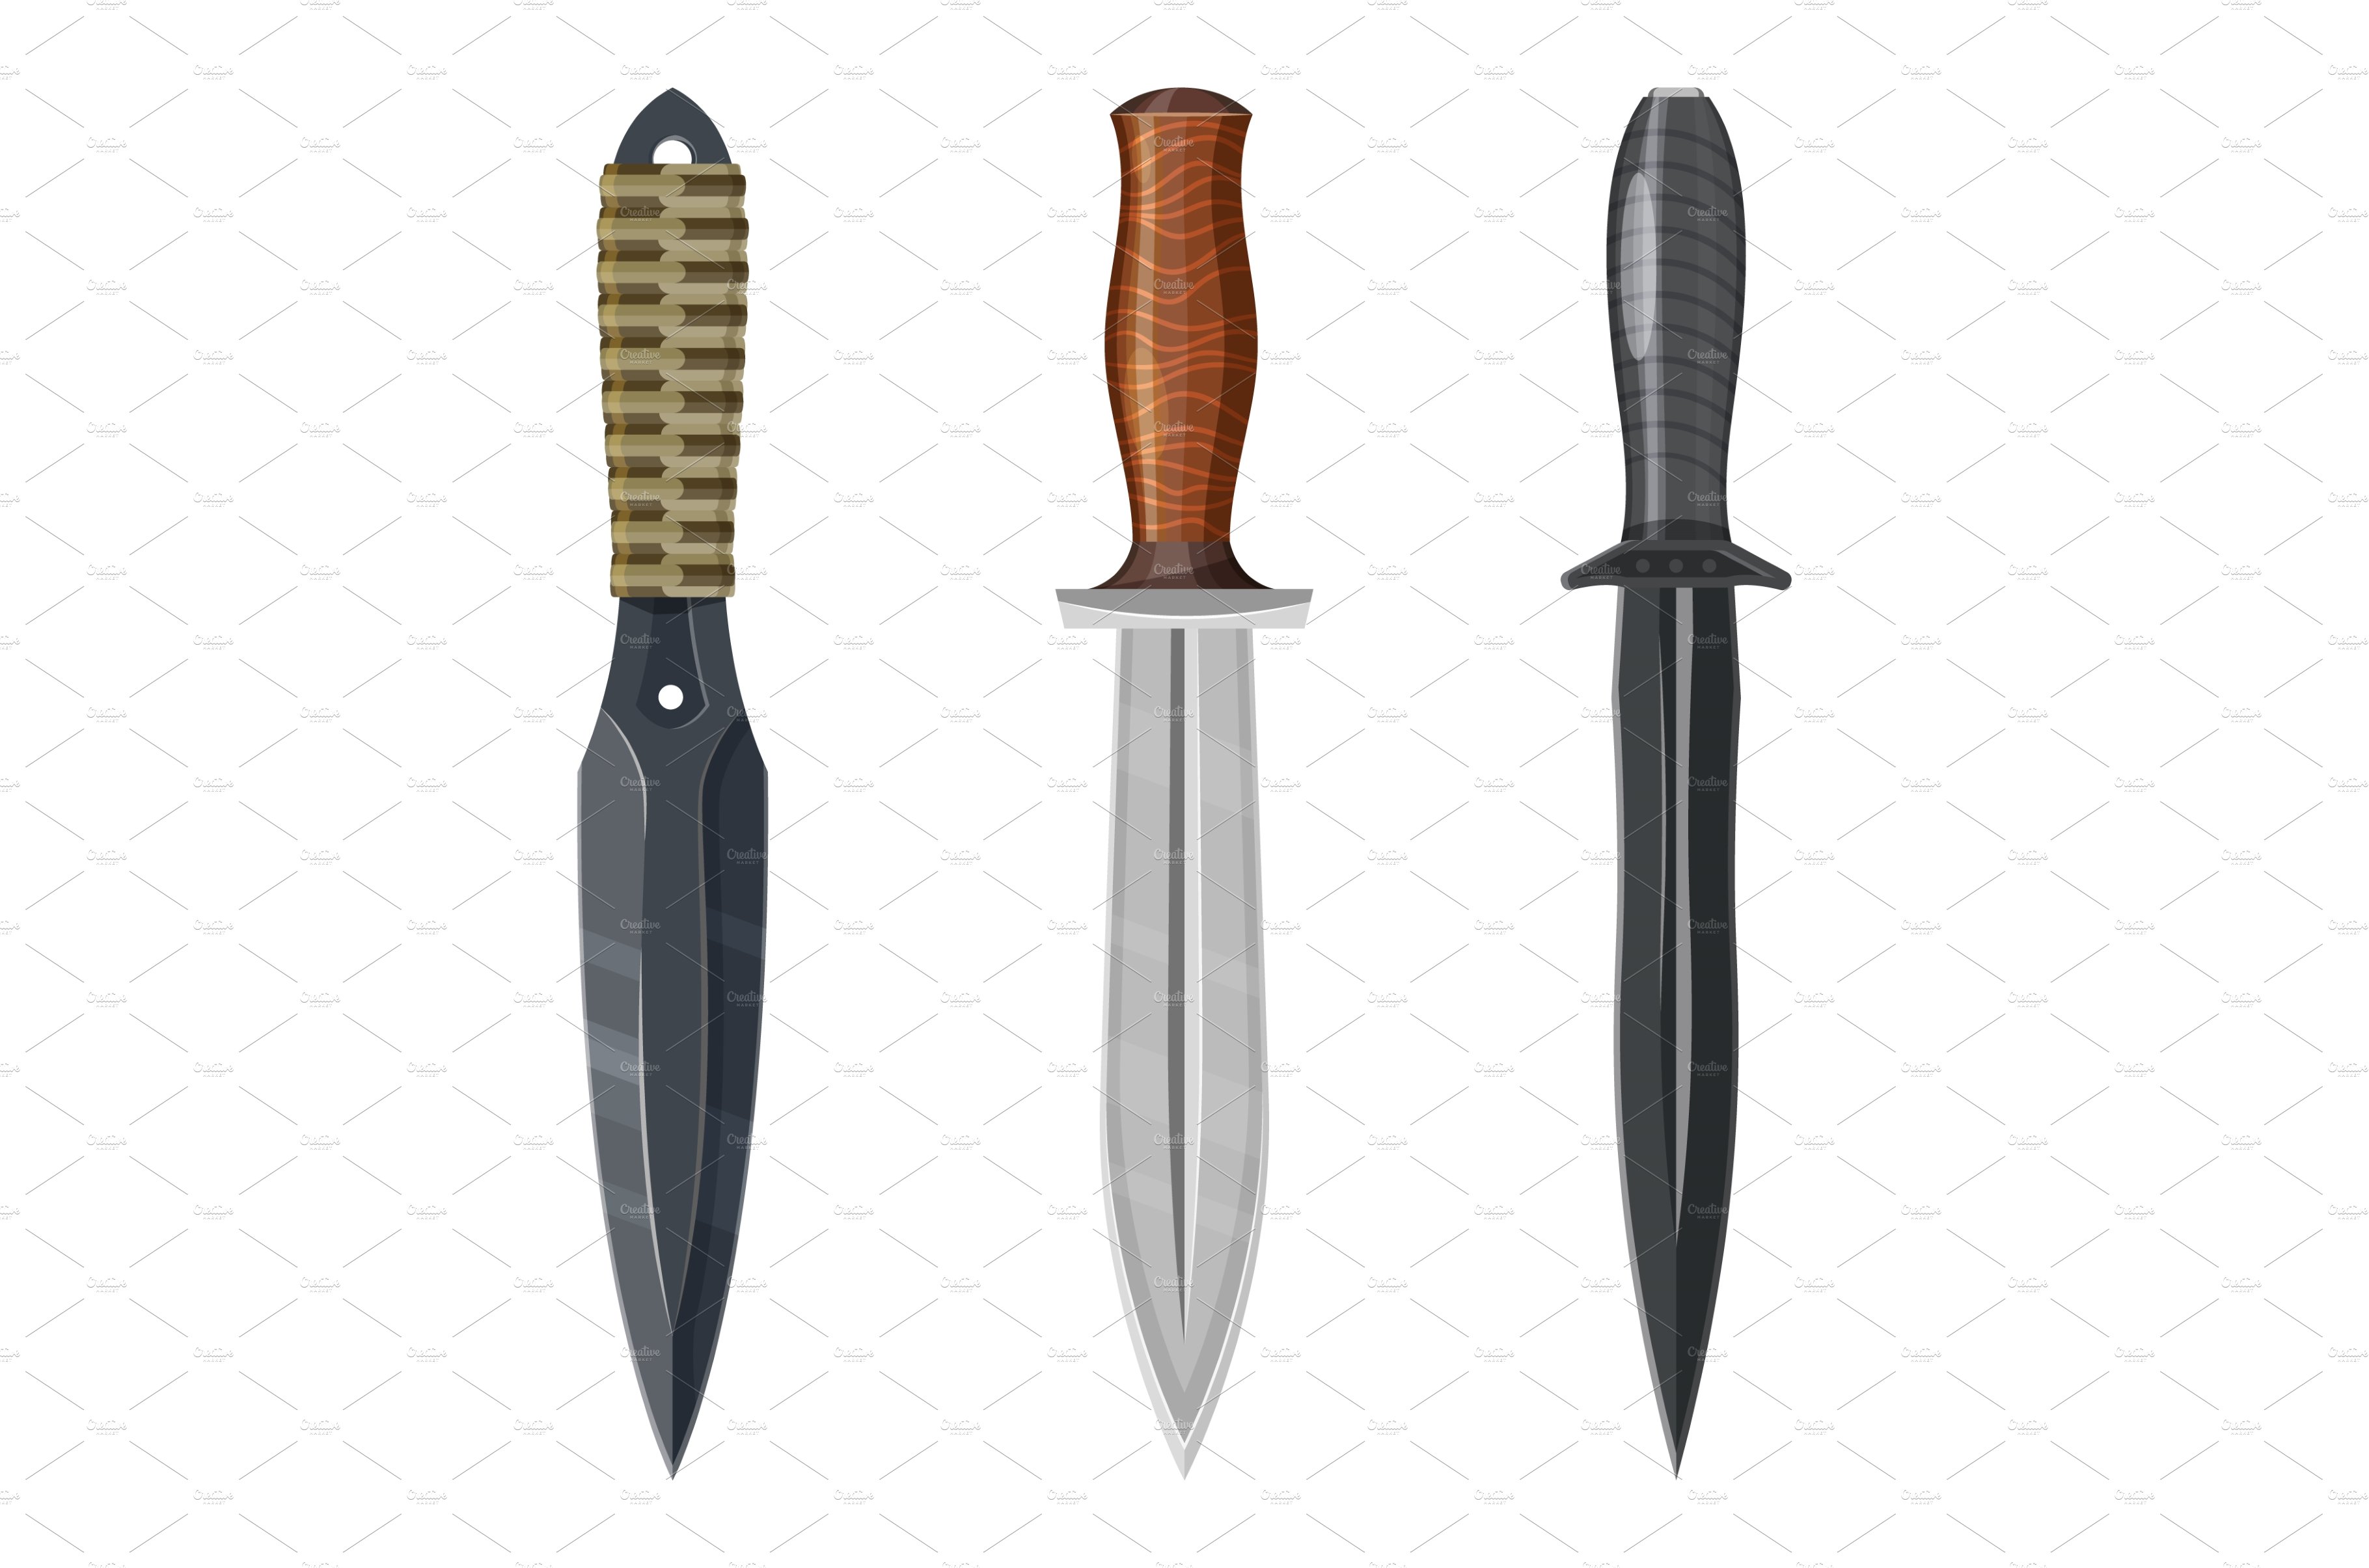 Knives and combat weapon blades or cover image.